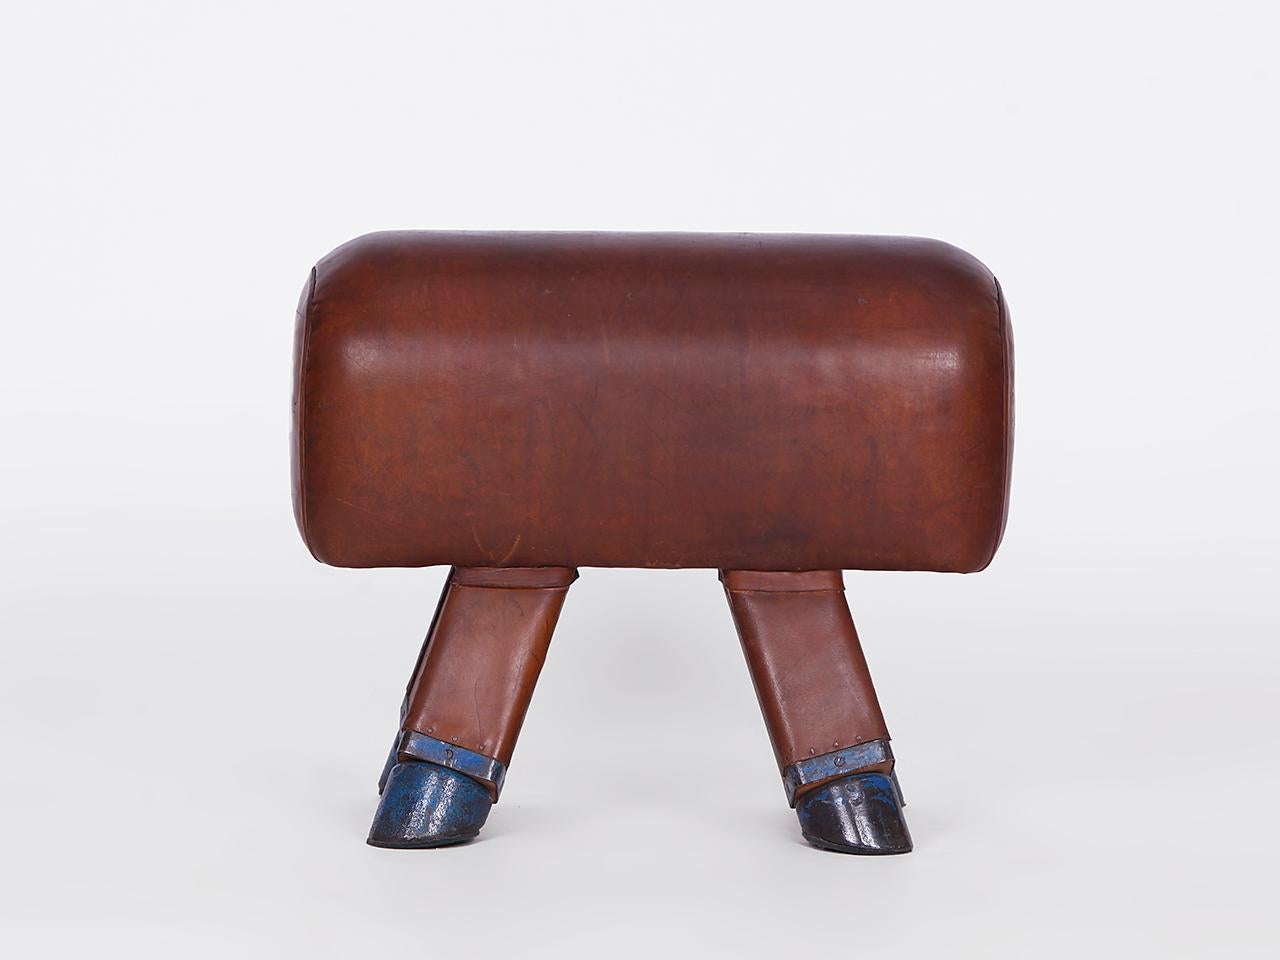 Industrial Gymnastic Vintage Czech Leather Gym Stool Bench Pommel Horse, 1930s For Sale